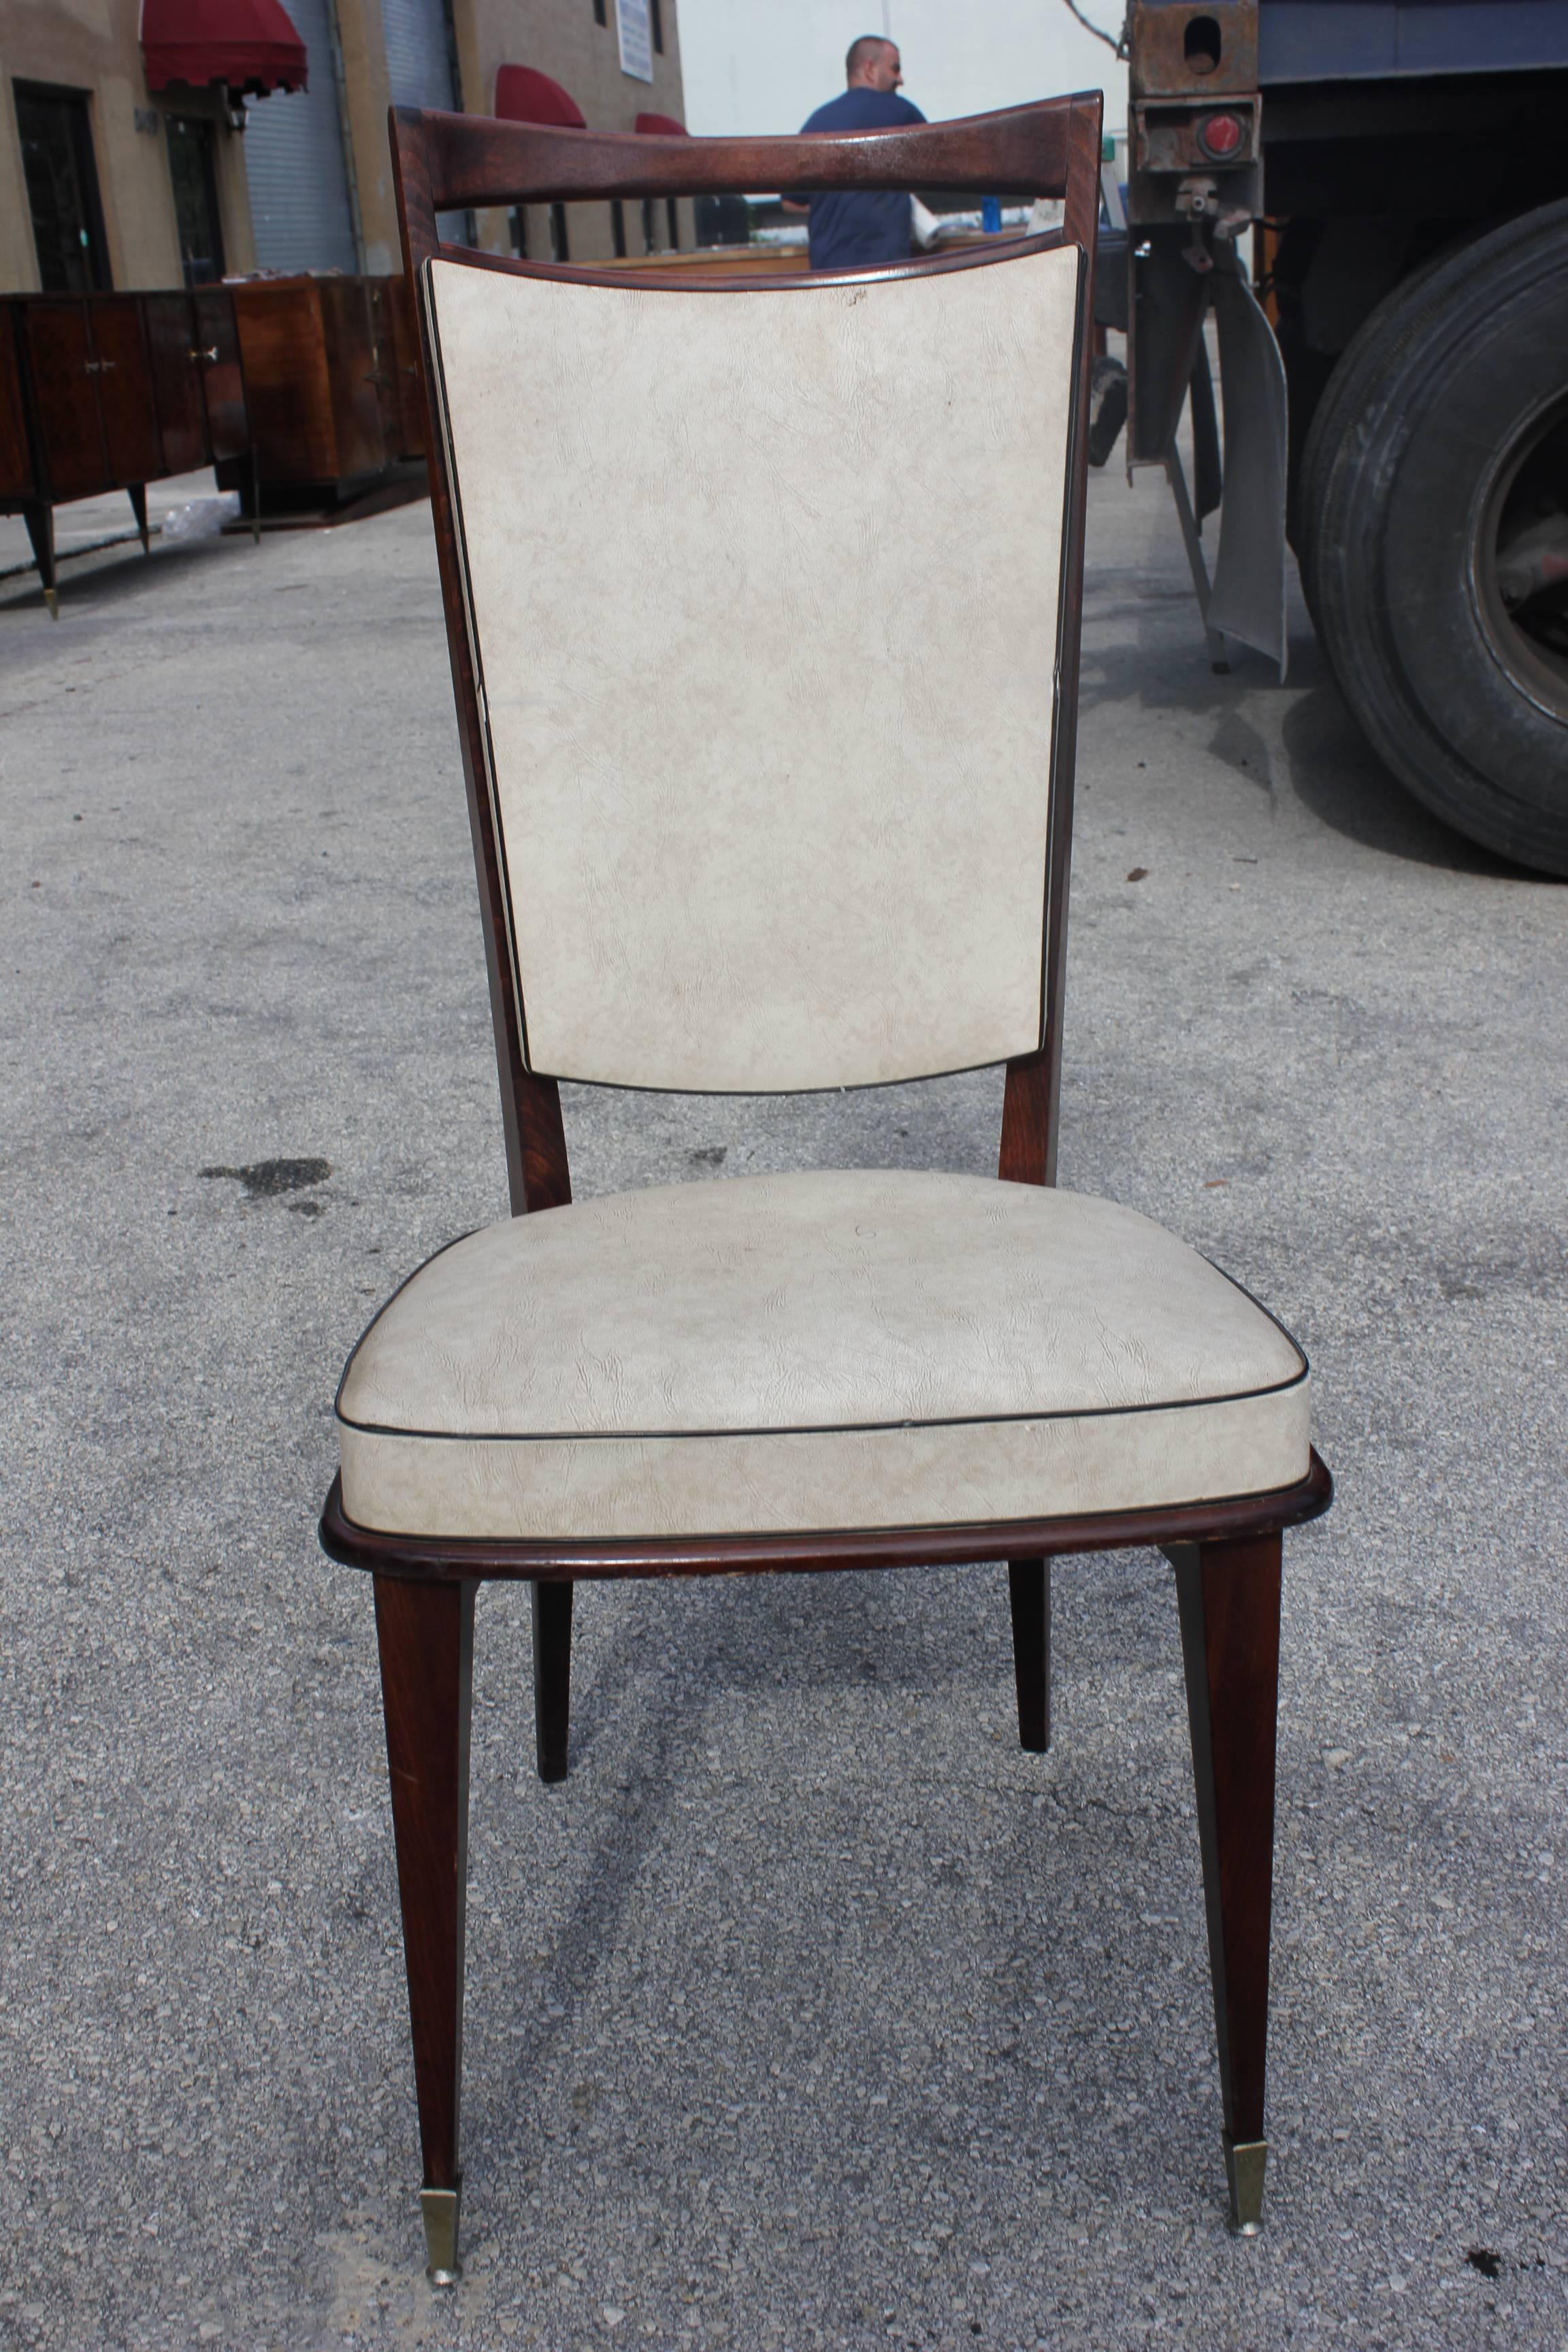 A set of five French Art Deco walnut dining chairs, circa 1940s. Reupholstery recommended.